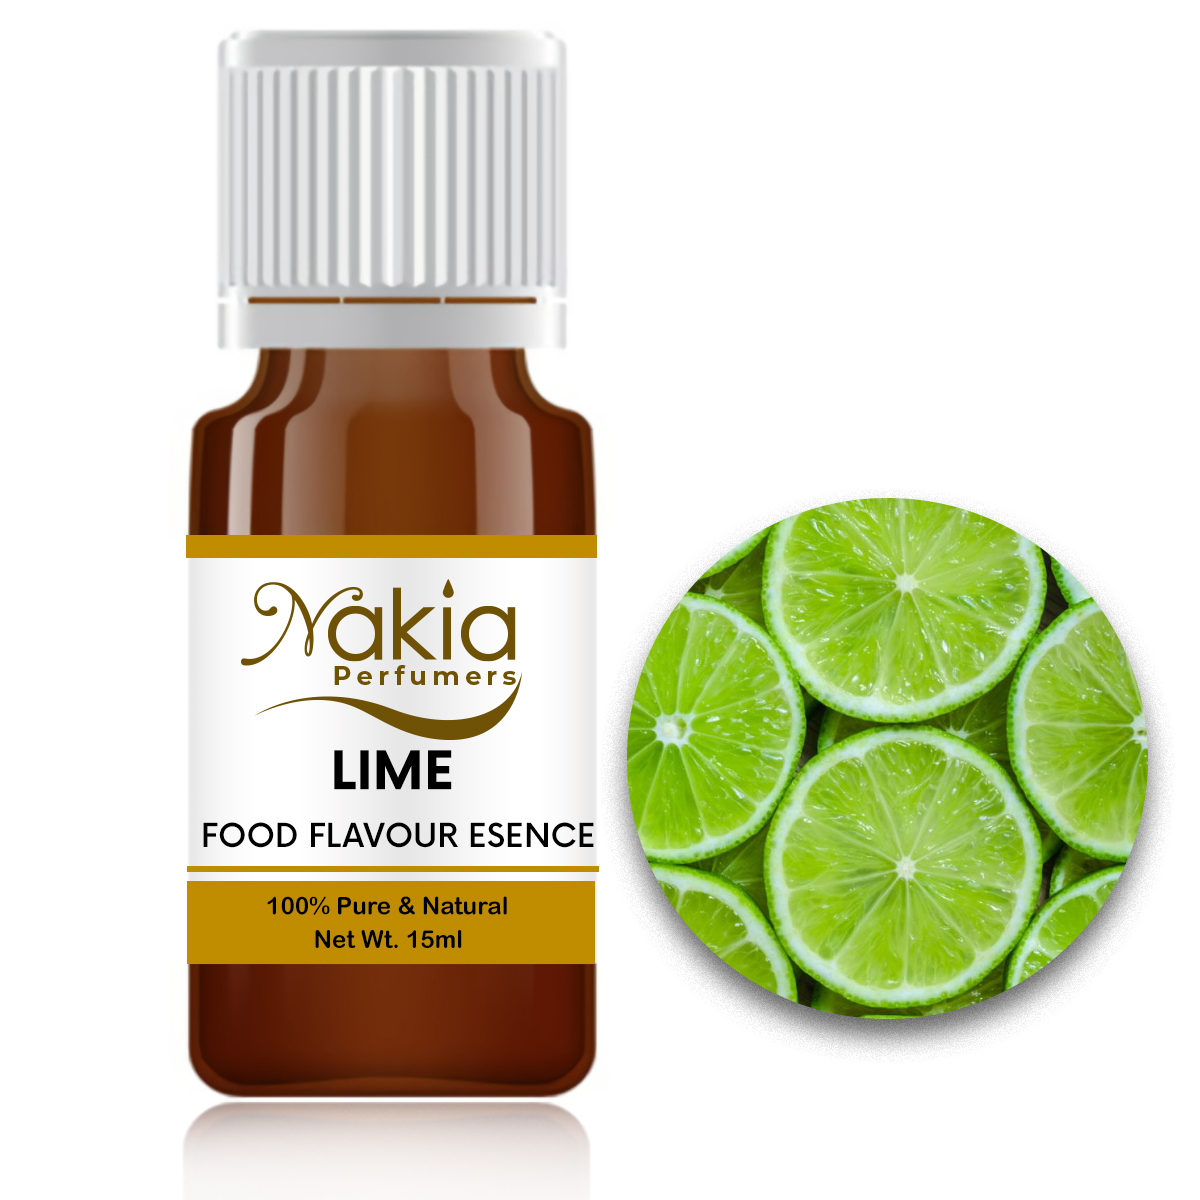 LIME FLAVOURING ESSENCE